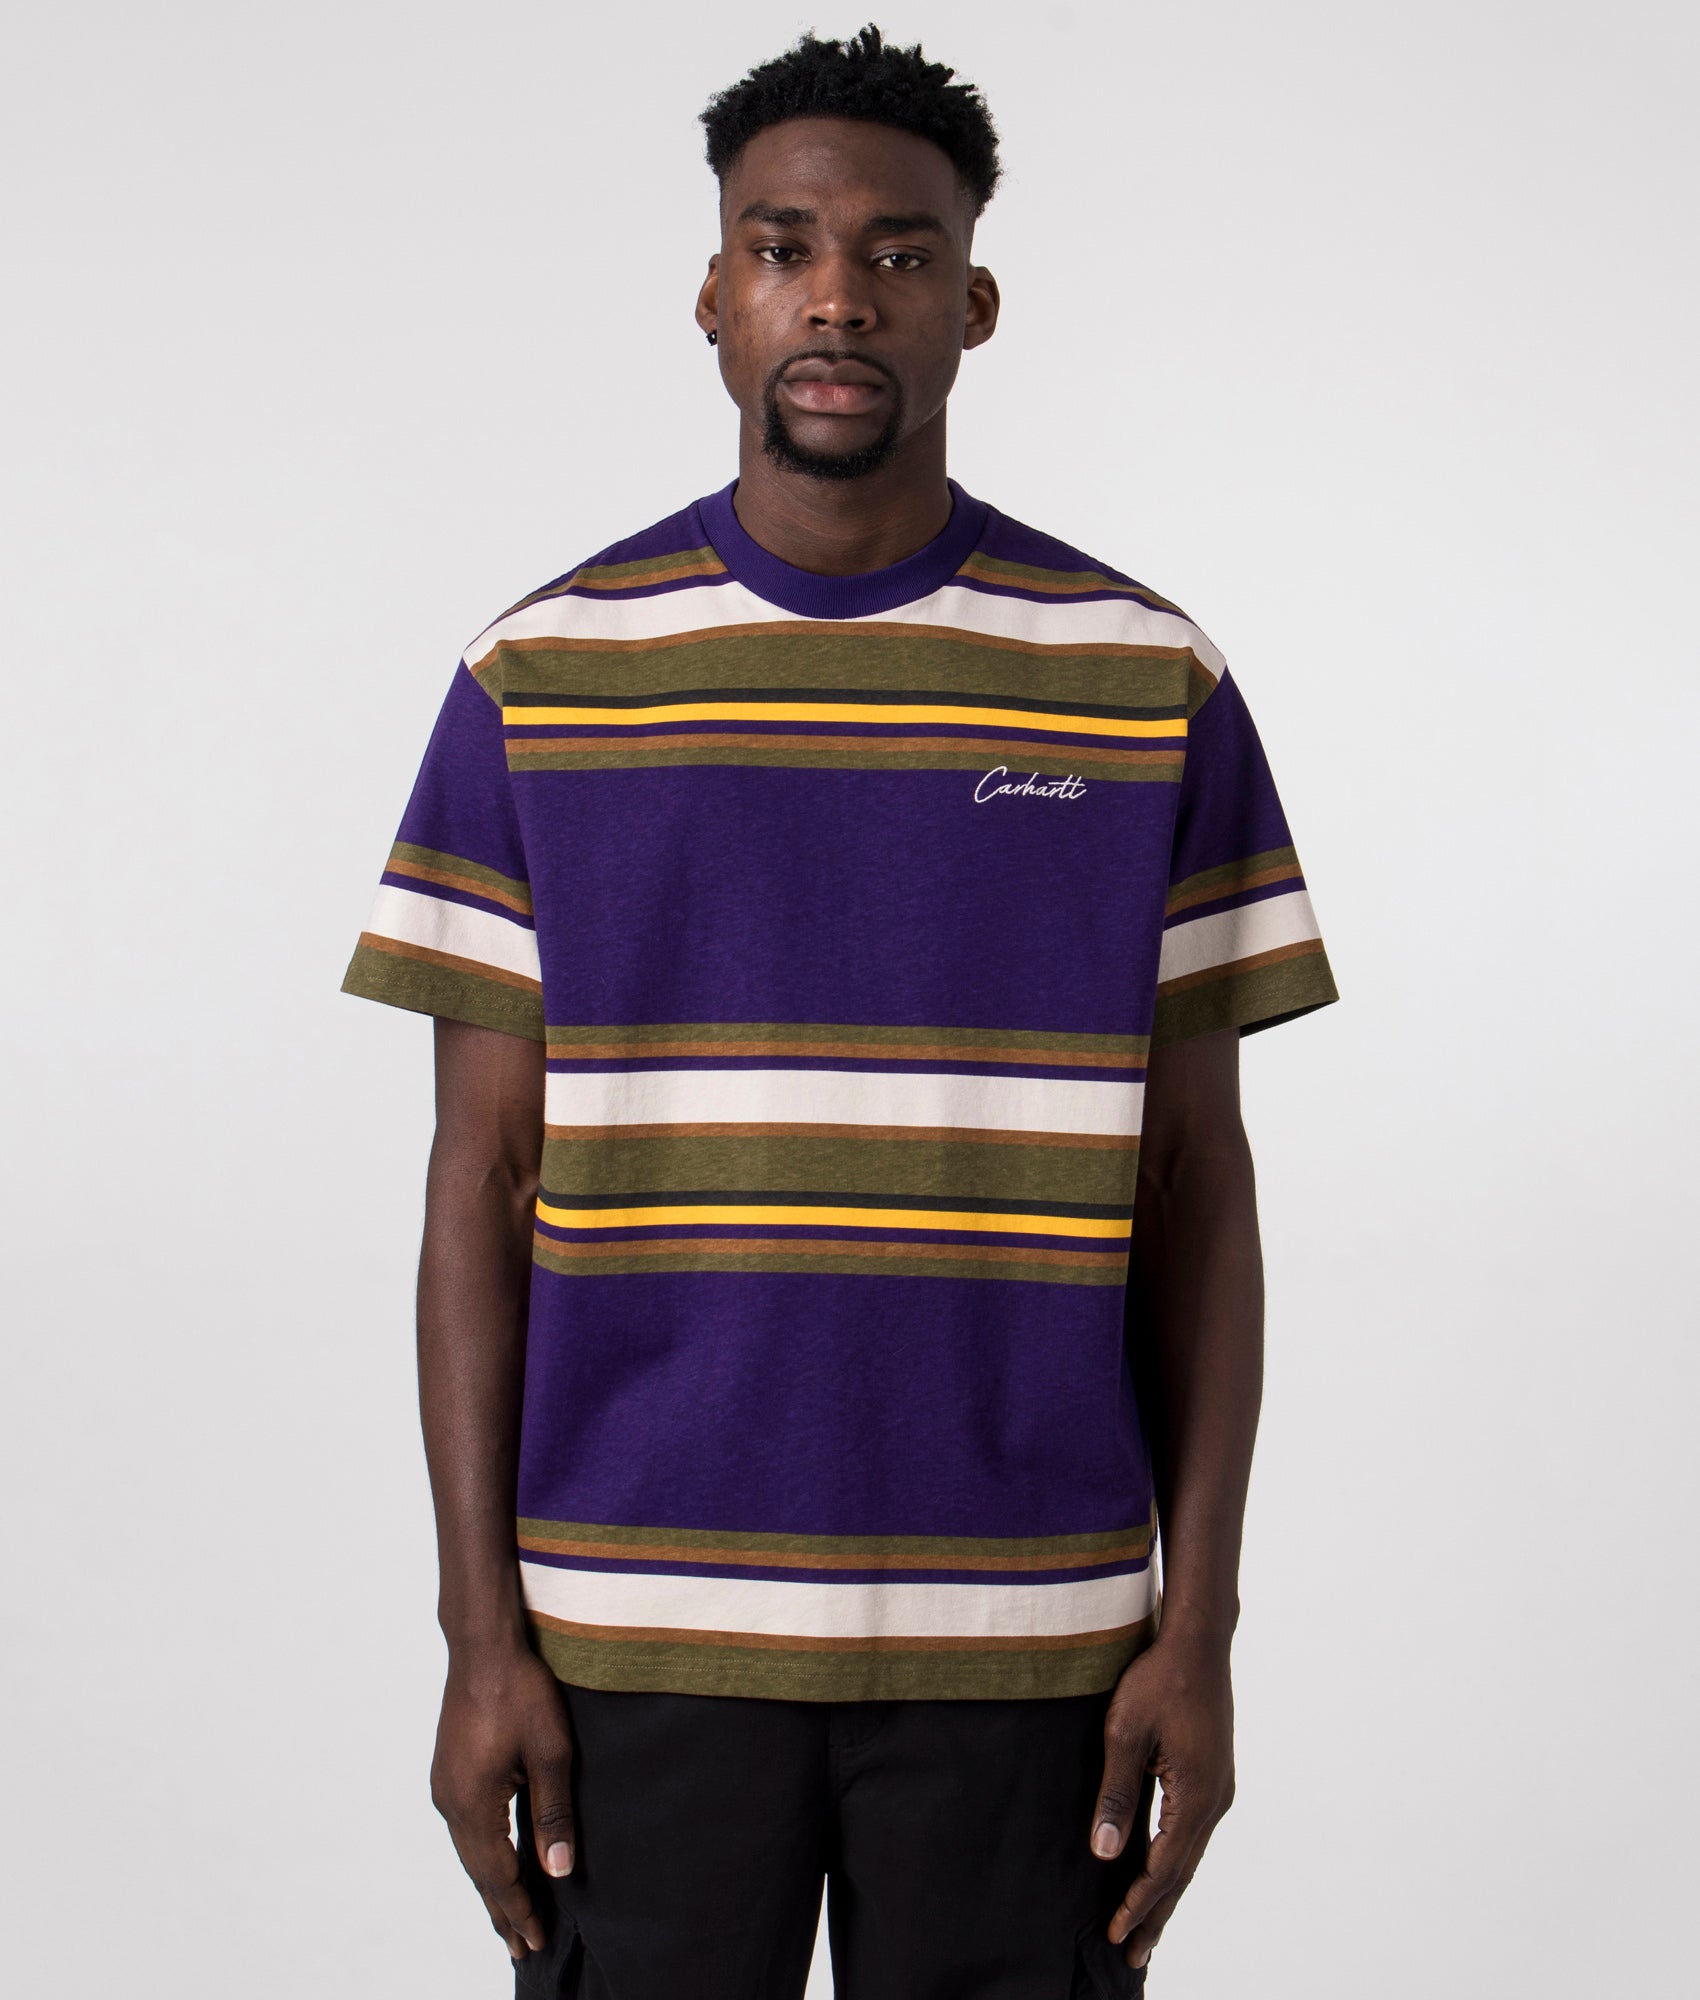 Carhartt WIP Mens Relaxed Fit Morcom T-Shirt - Colour: 20U60 Morcom Stripe, Tyrian - Size: Large